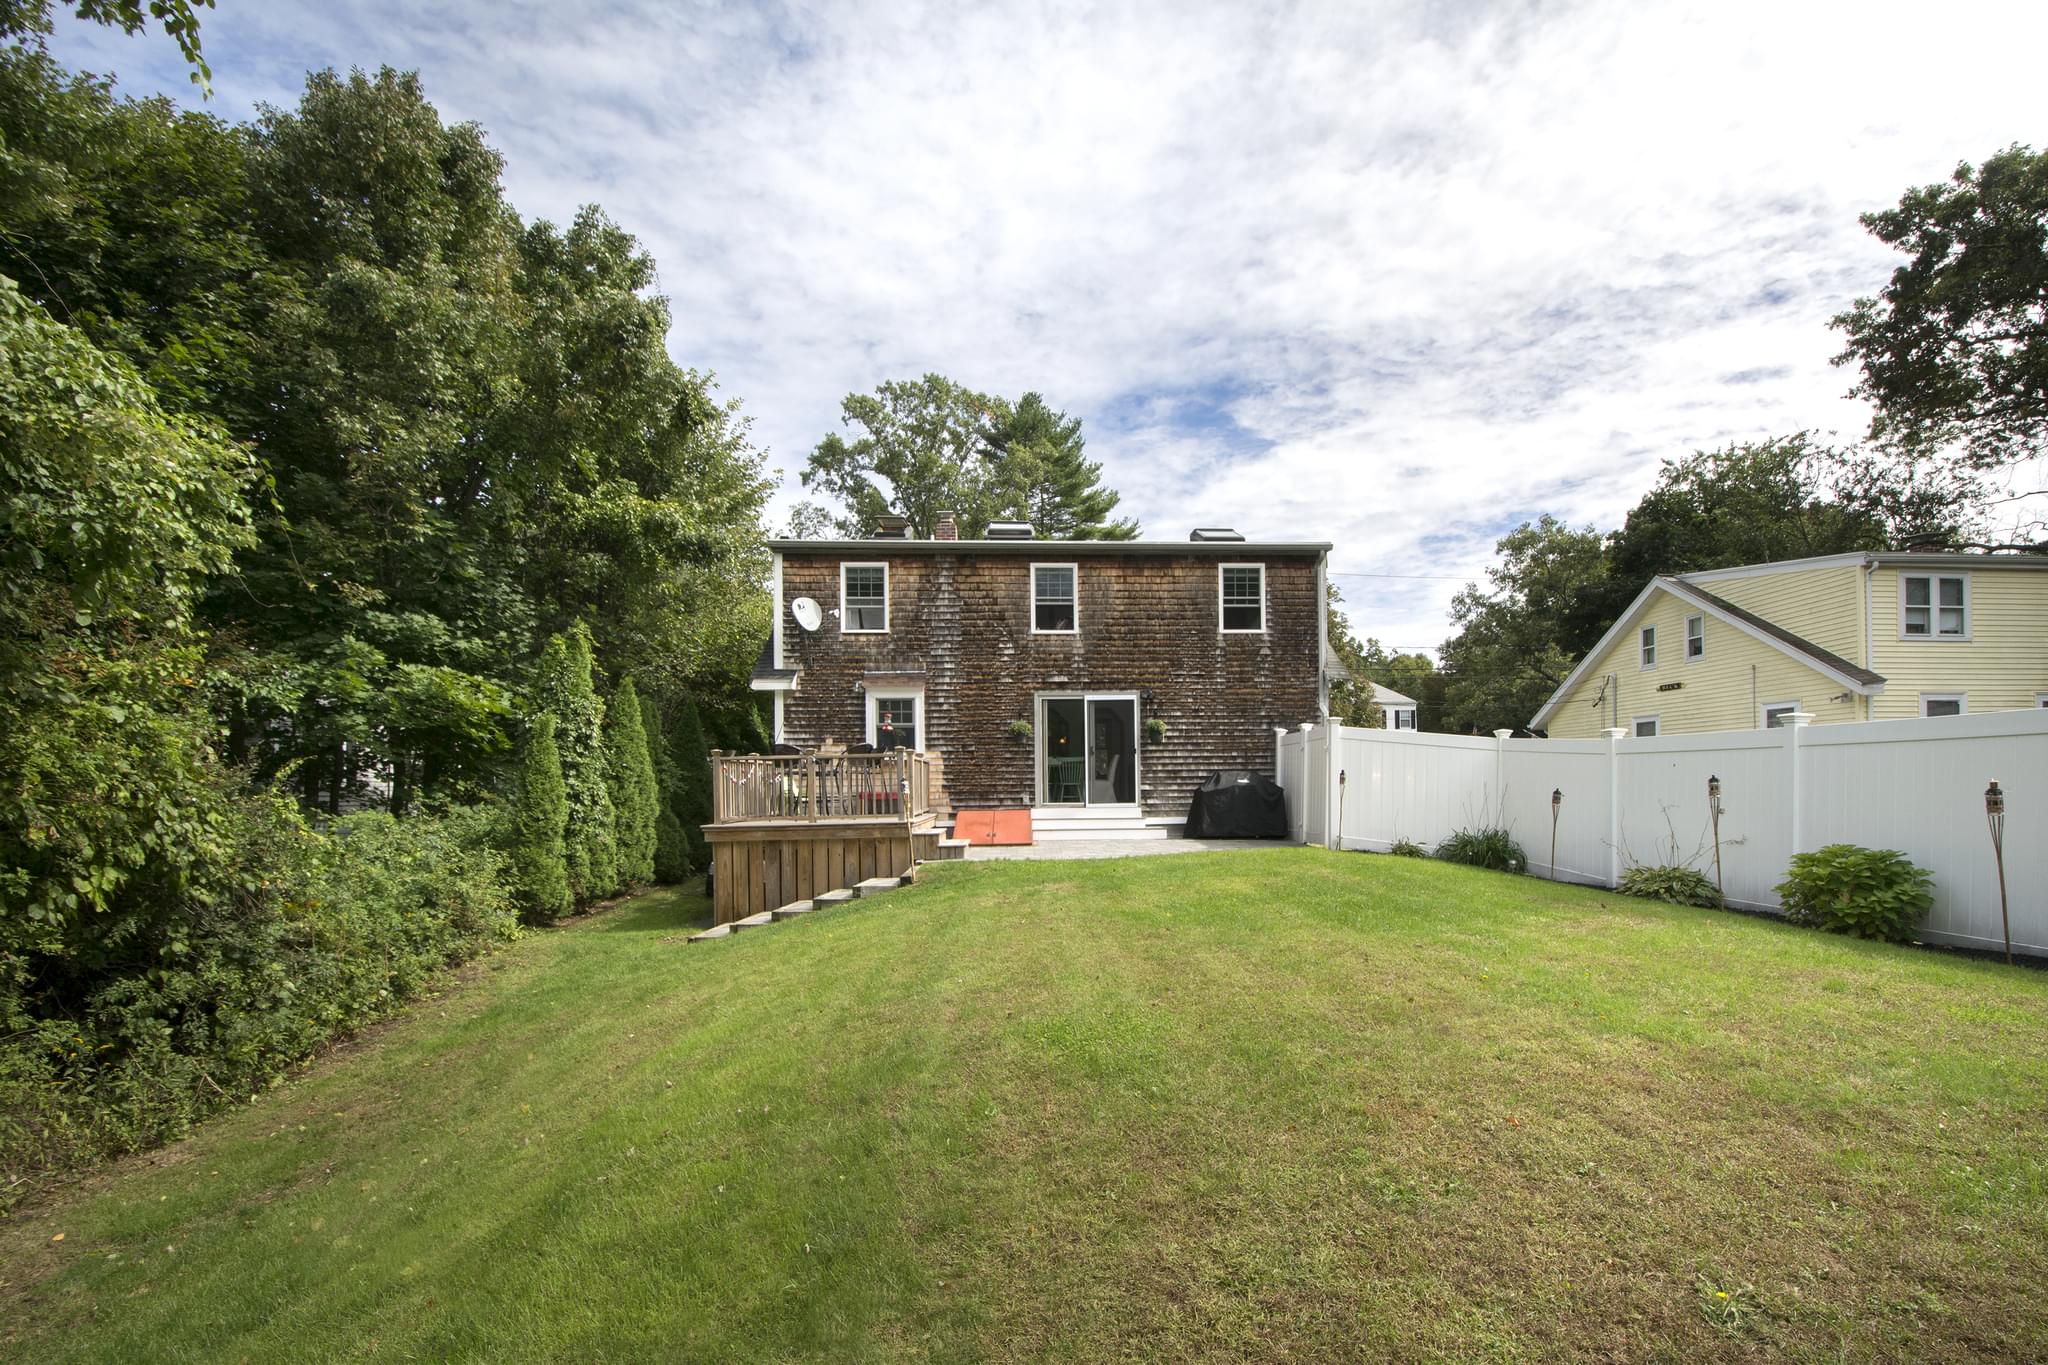  170 Booth Hill Rd, Scituate, MA 02066, US Photo 22